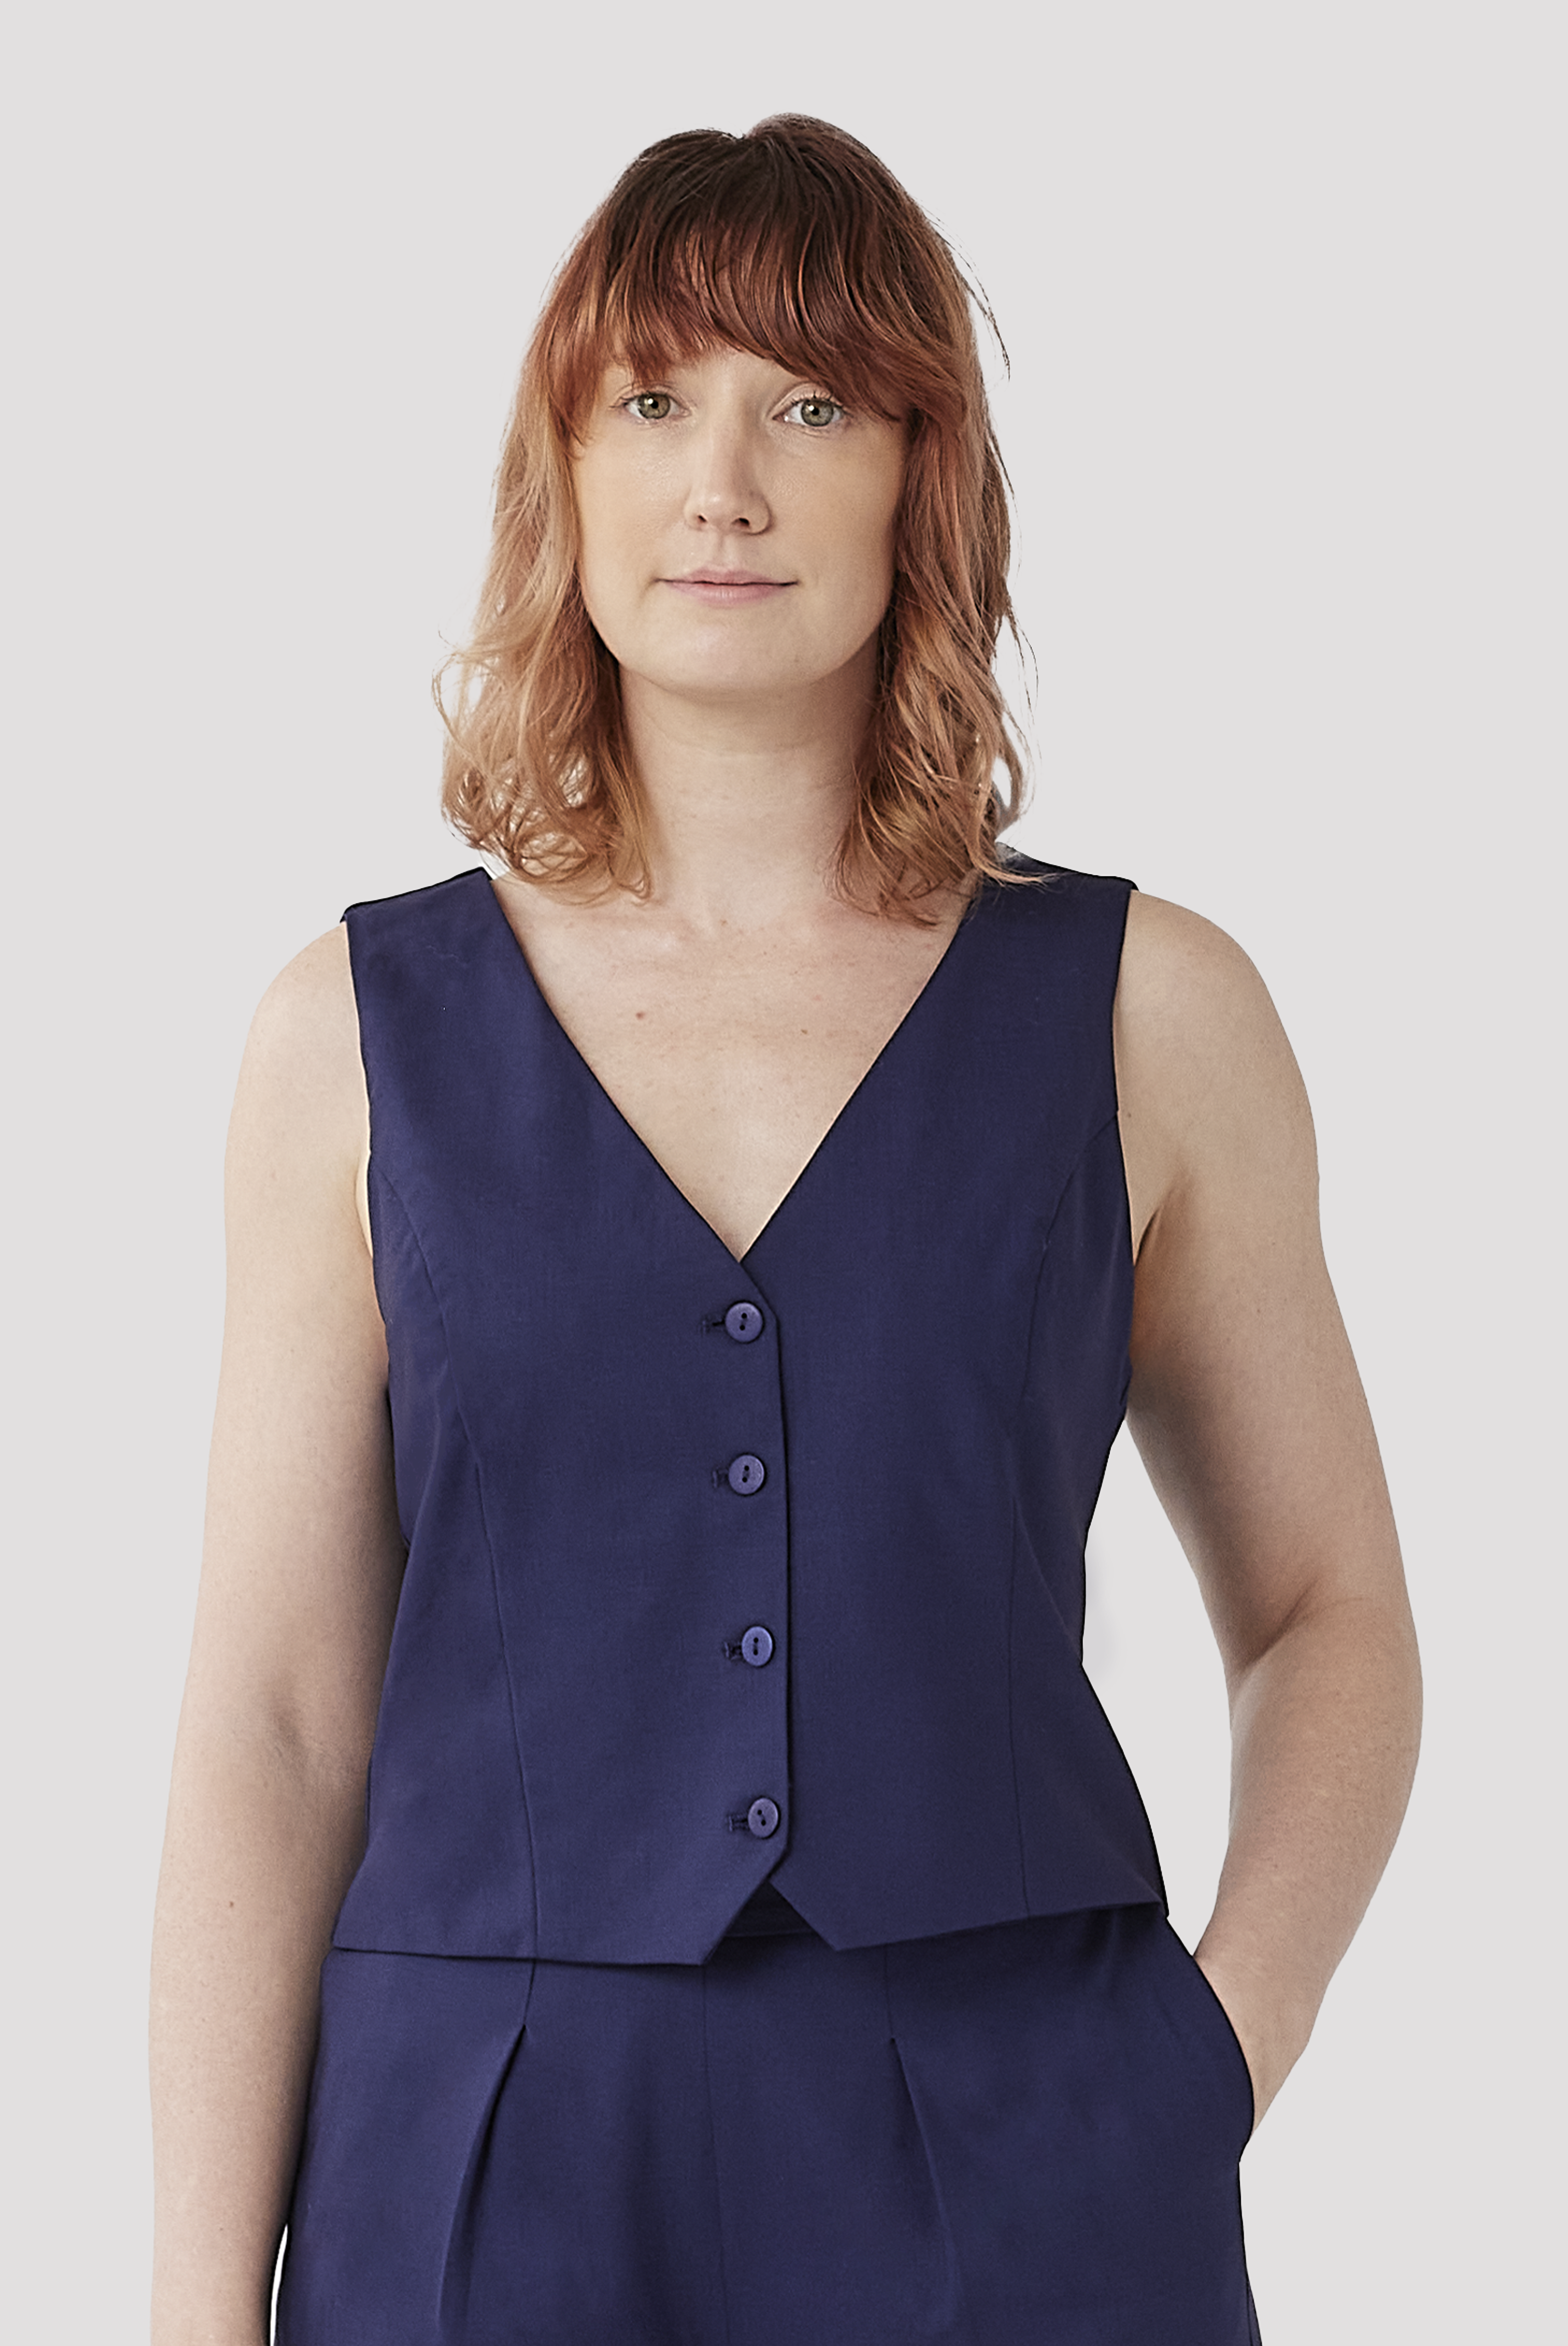 The Wool Vest by Aam is a chic, slightly cropped vest designed to flatter women with full hips and thighs. Featuring an elegant v-neck, tone-on-tone buttons and a slimming silhouette through the waist. Available in four colors, including the vibrant indigo shade shown in this photograph.